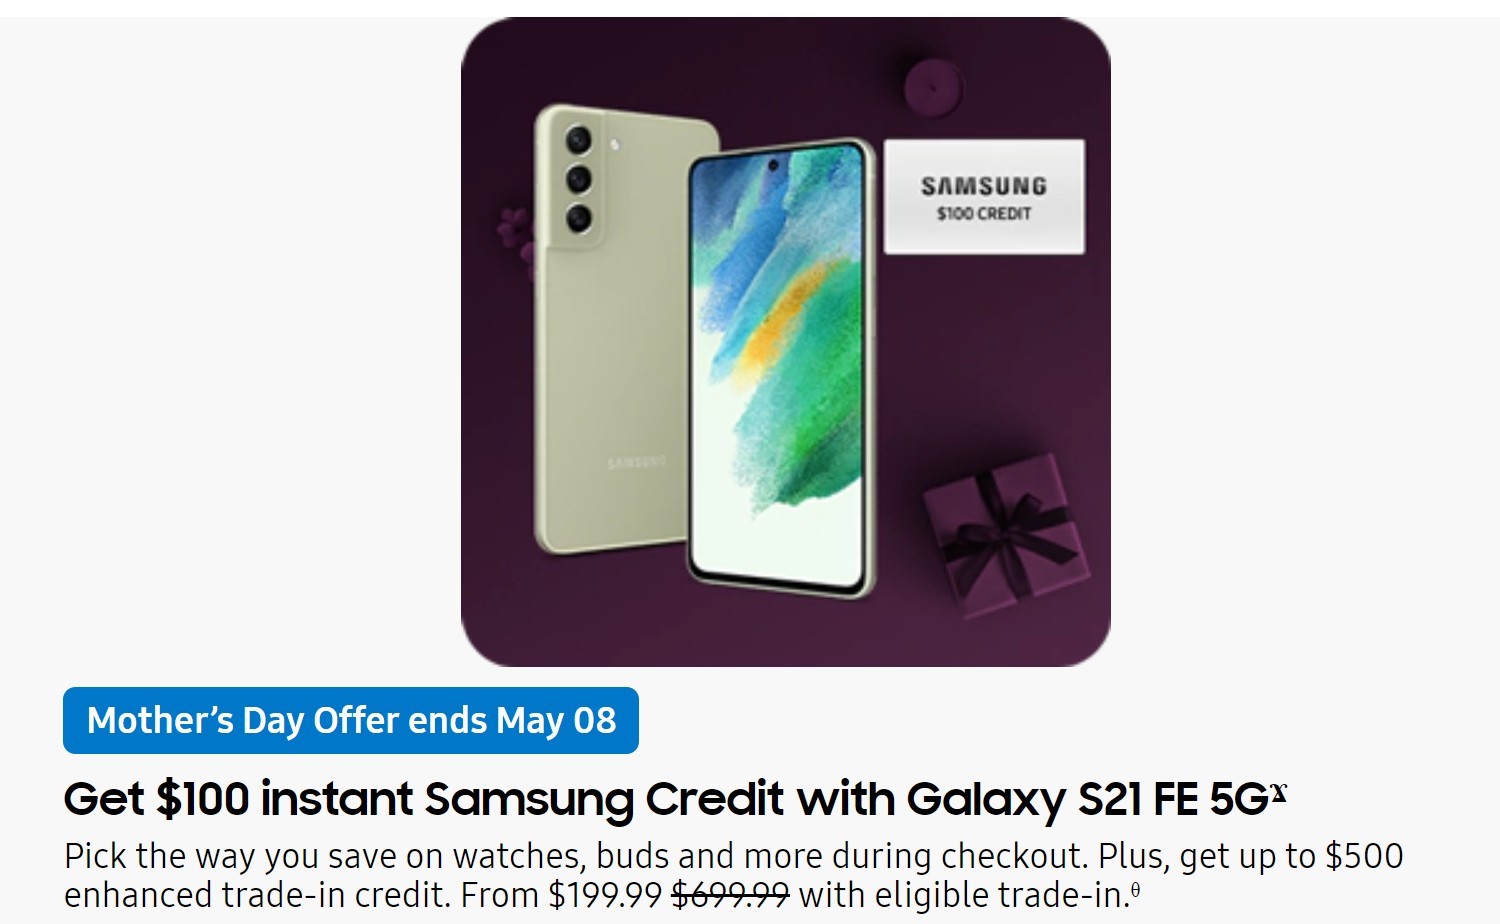 Samsung USA Mother's Day offers include free memory upgrades, Galaxy Buds, and Watches